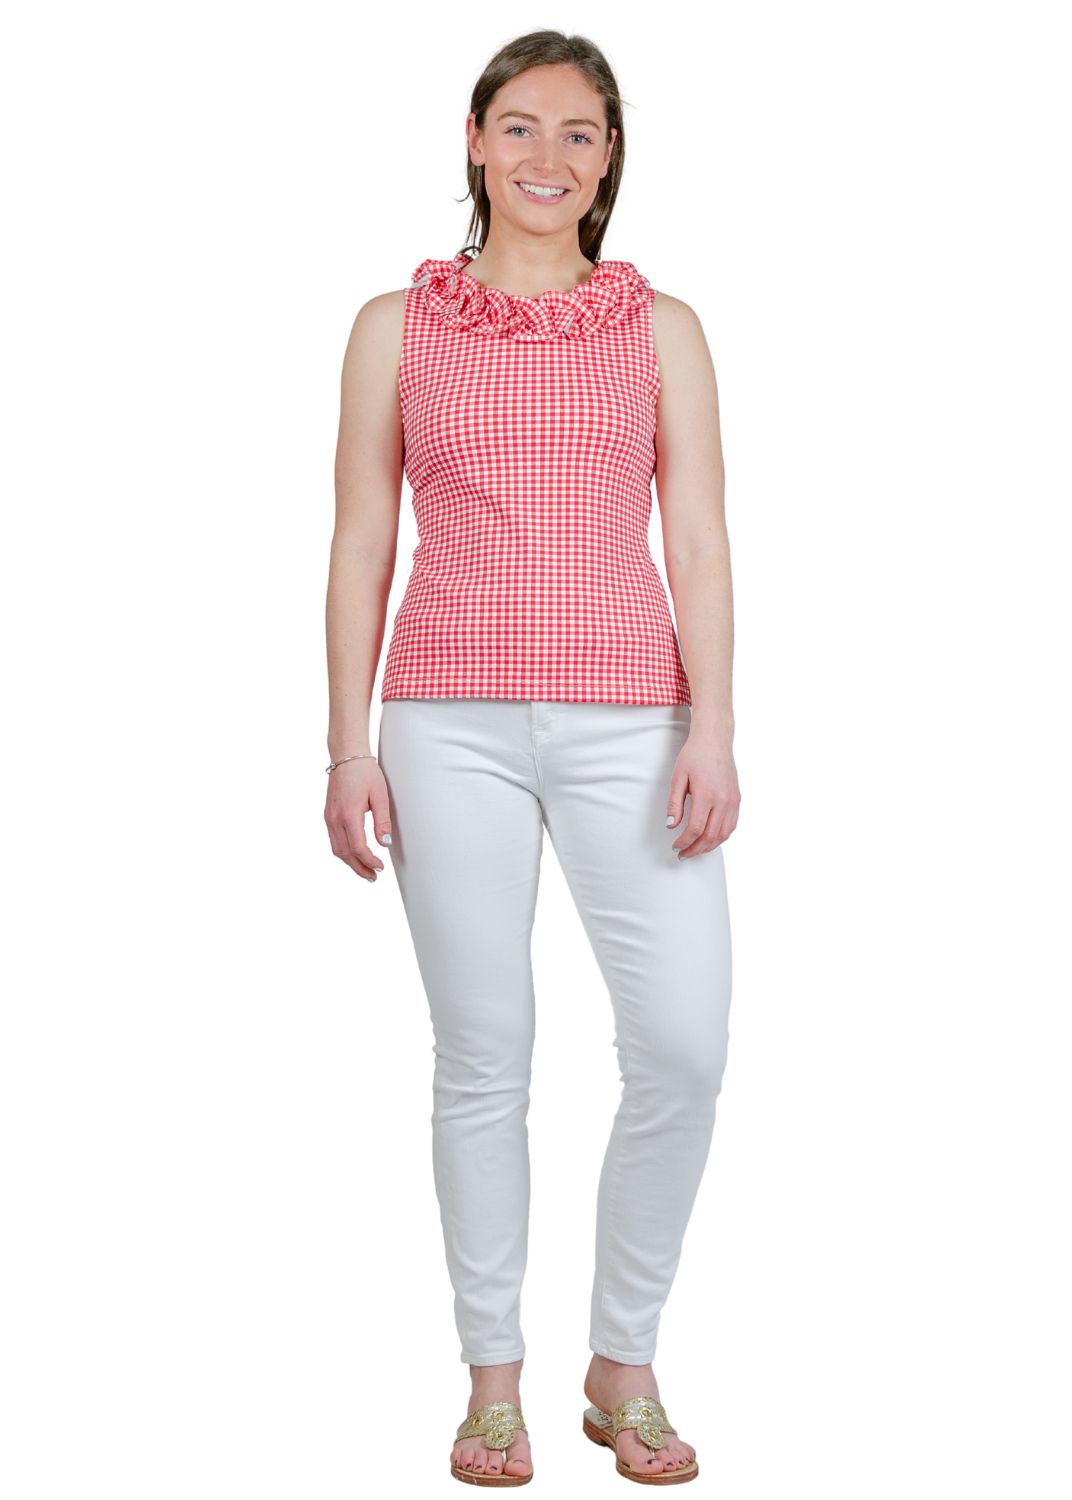 Cricket Sleeveless Top - Gingham Check Red/White